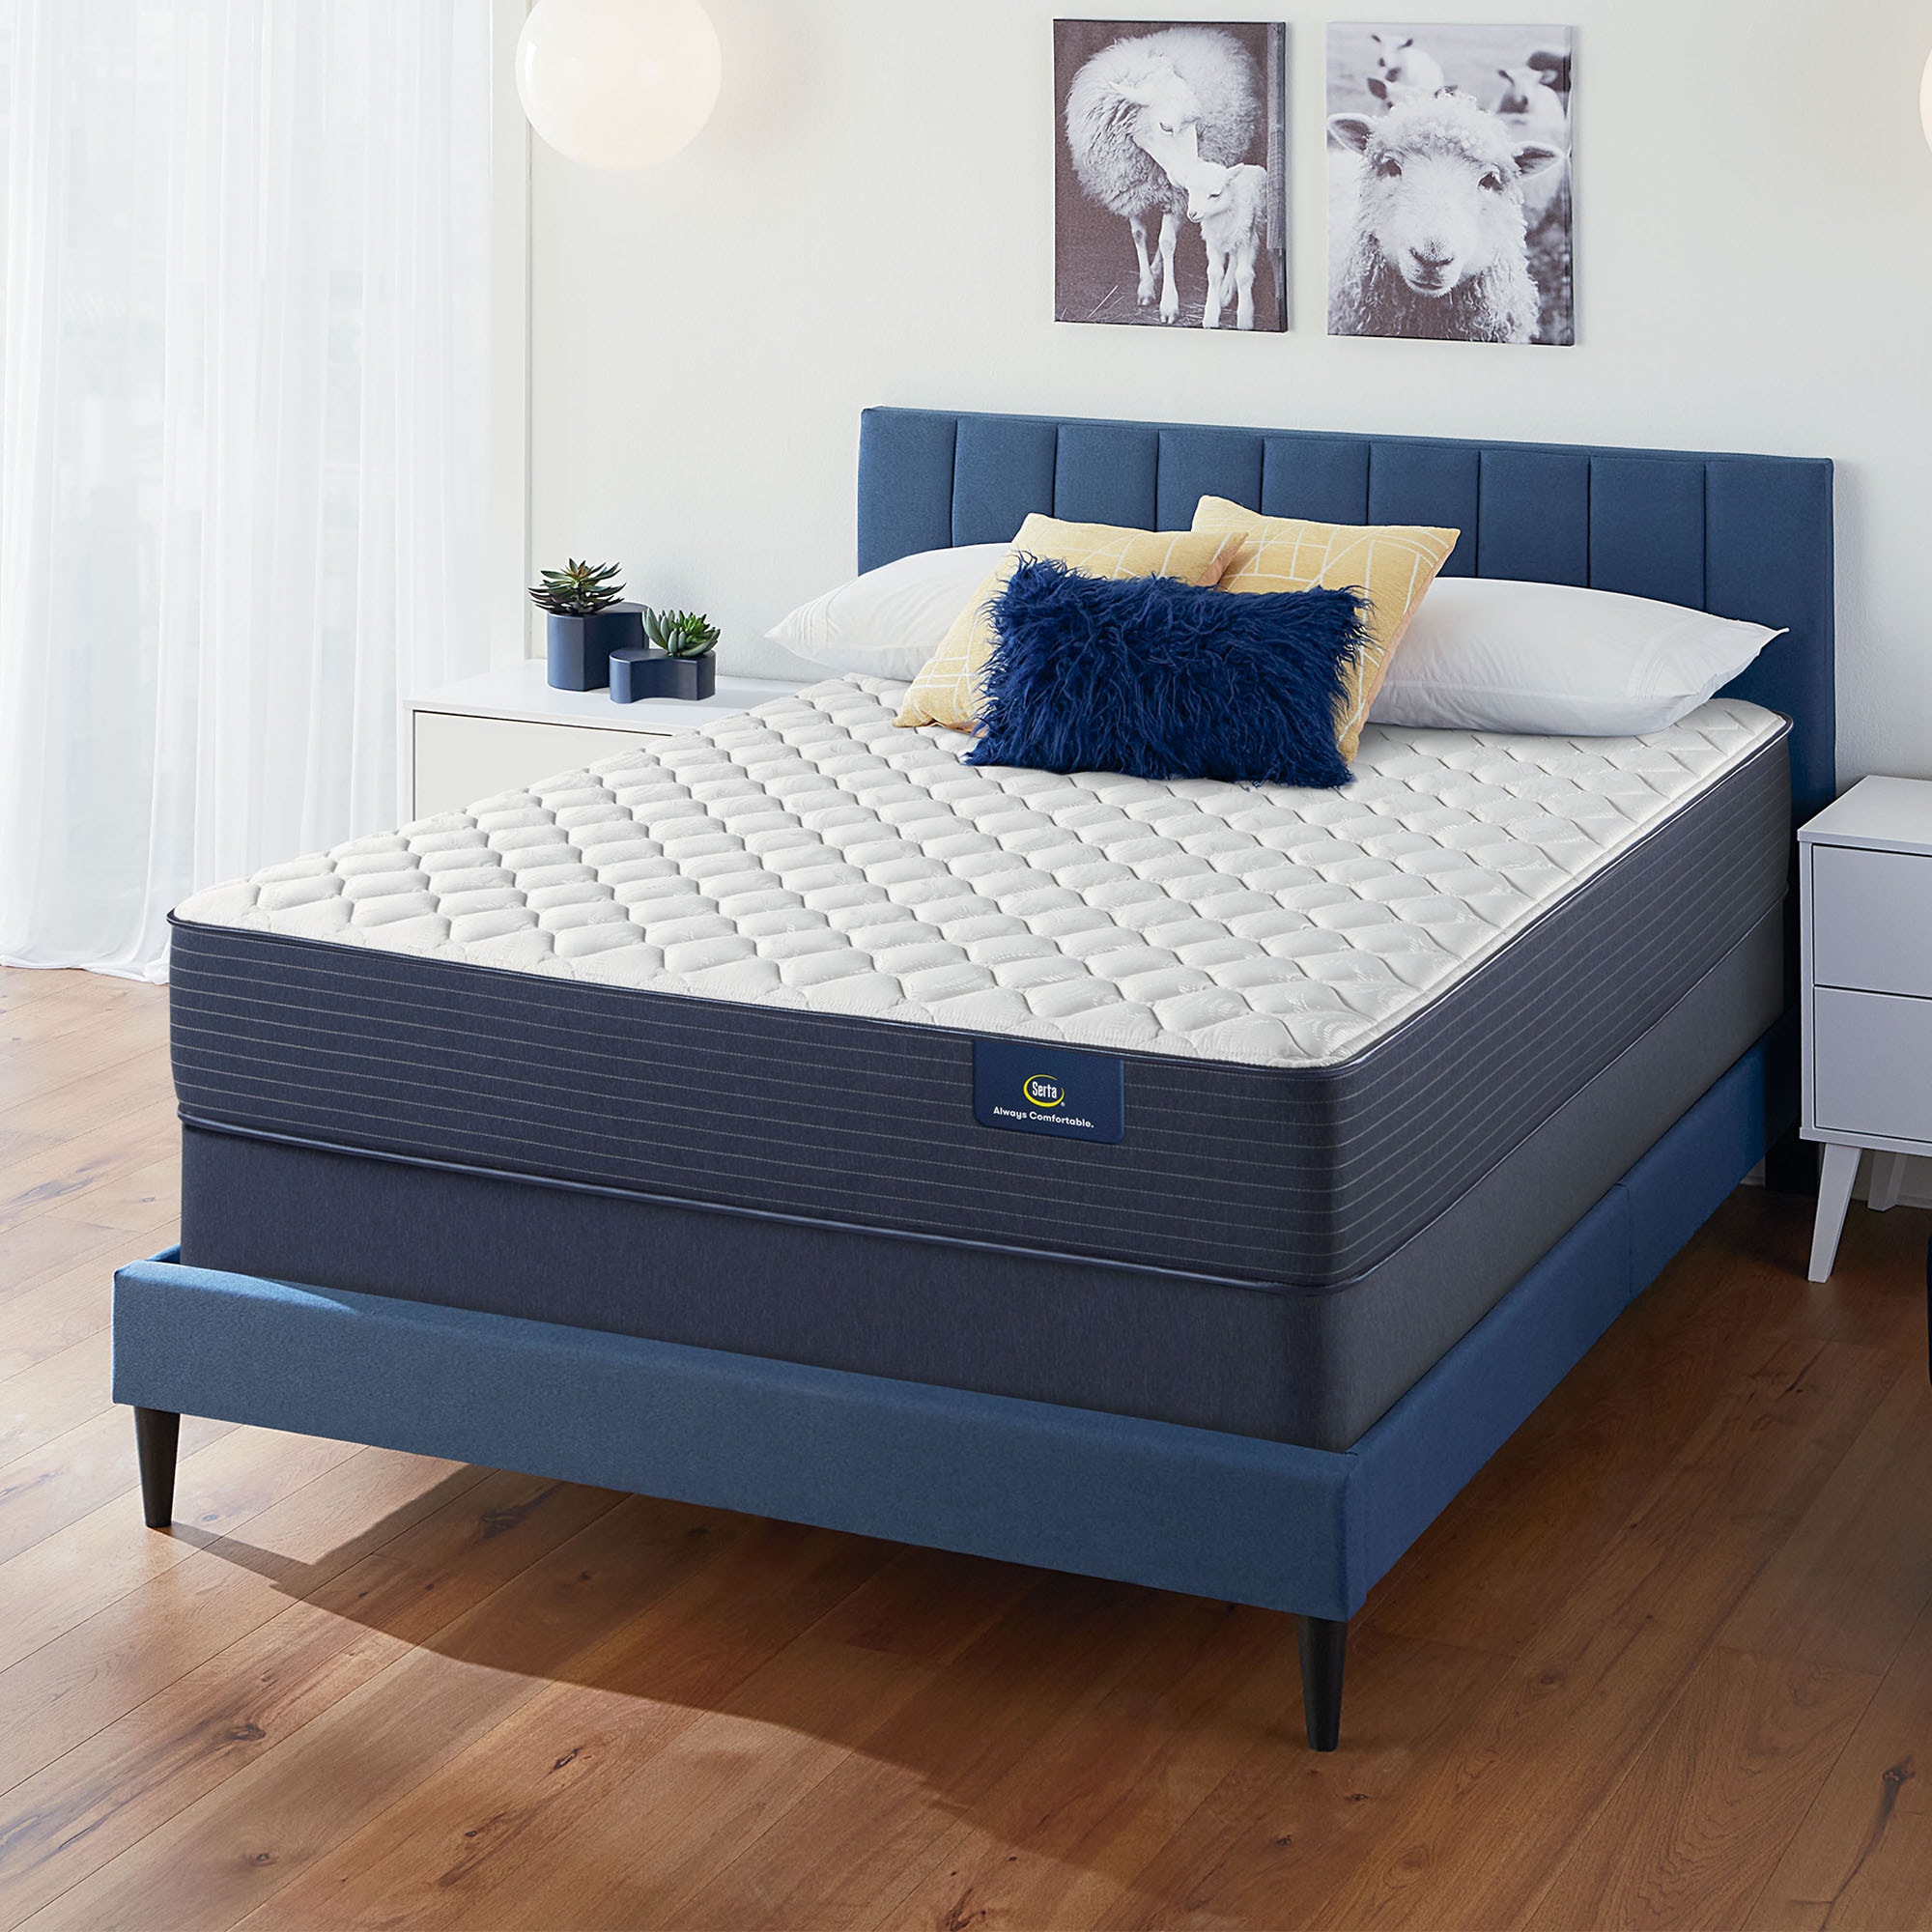 Spring Included Mattresses at